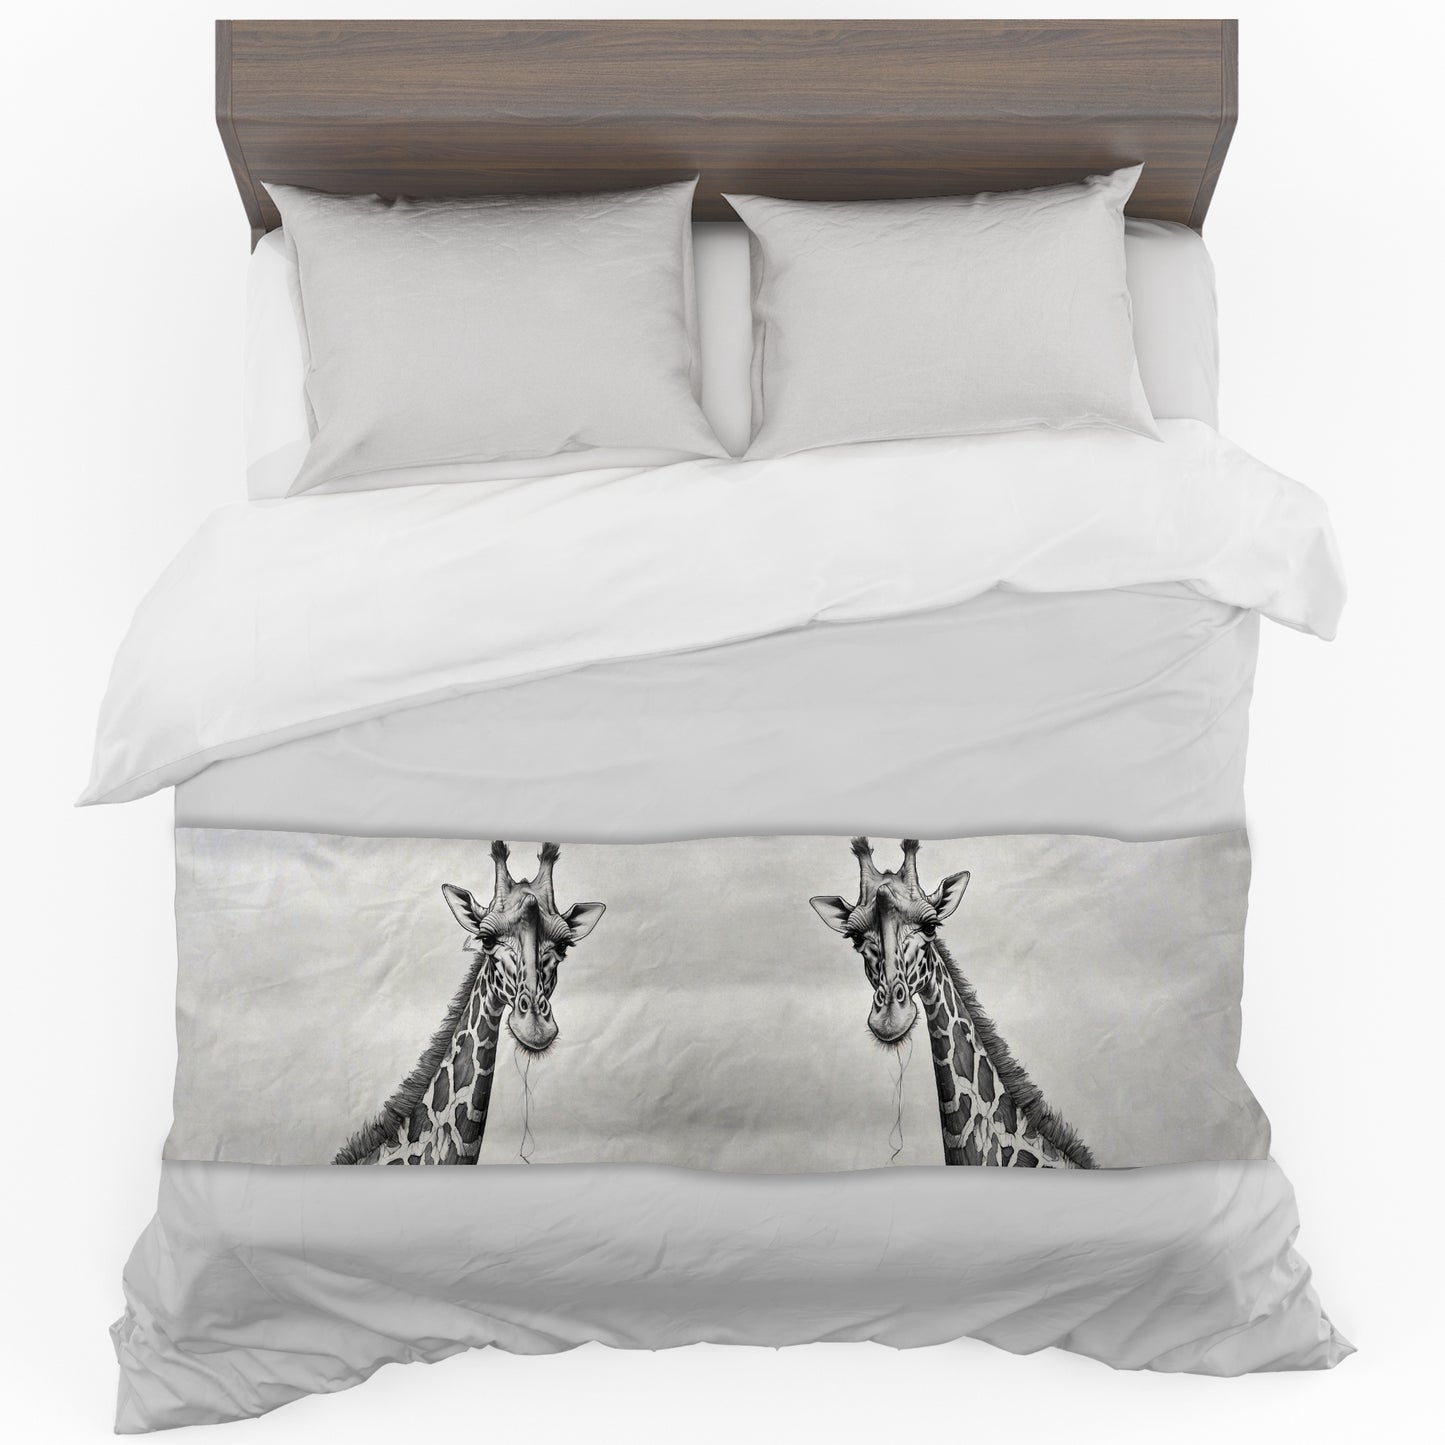 Giraffe Unraveling By Nathan Pieterse Bed Runner and Optional Pillowcases